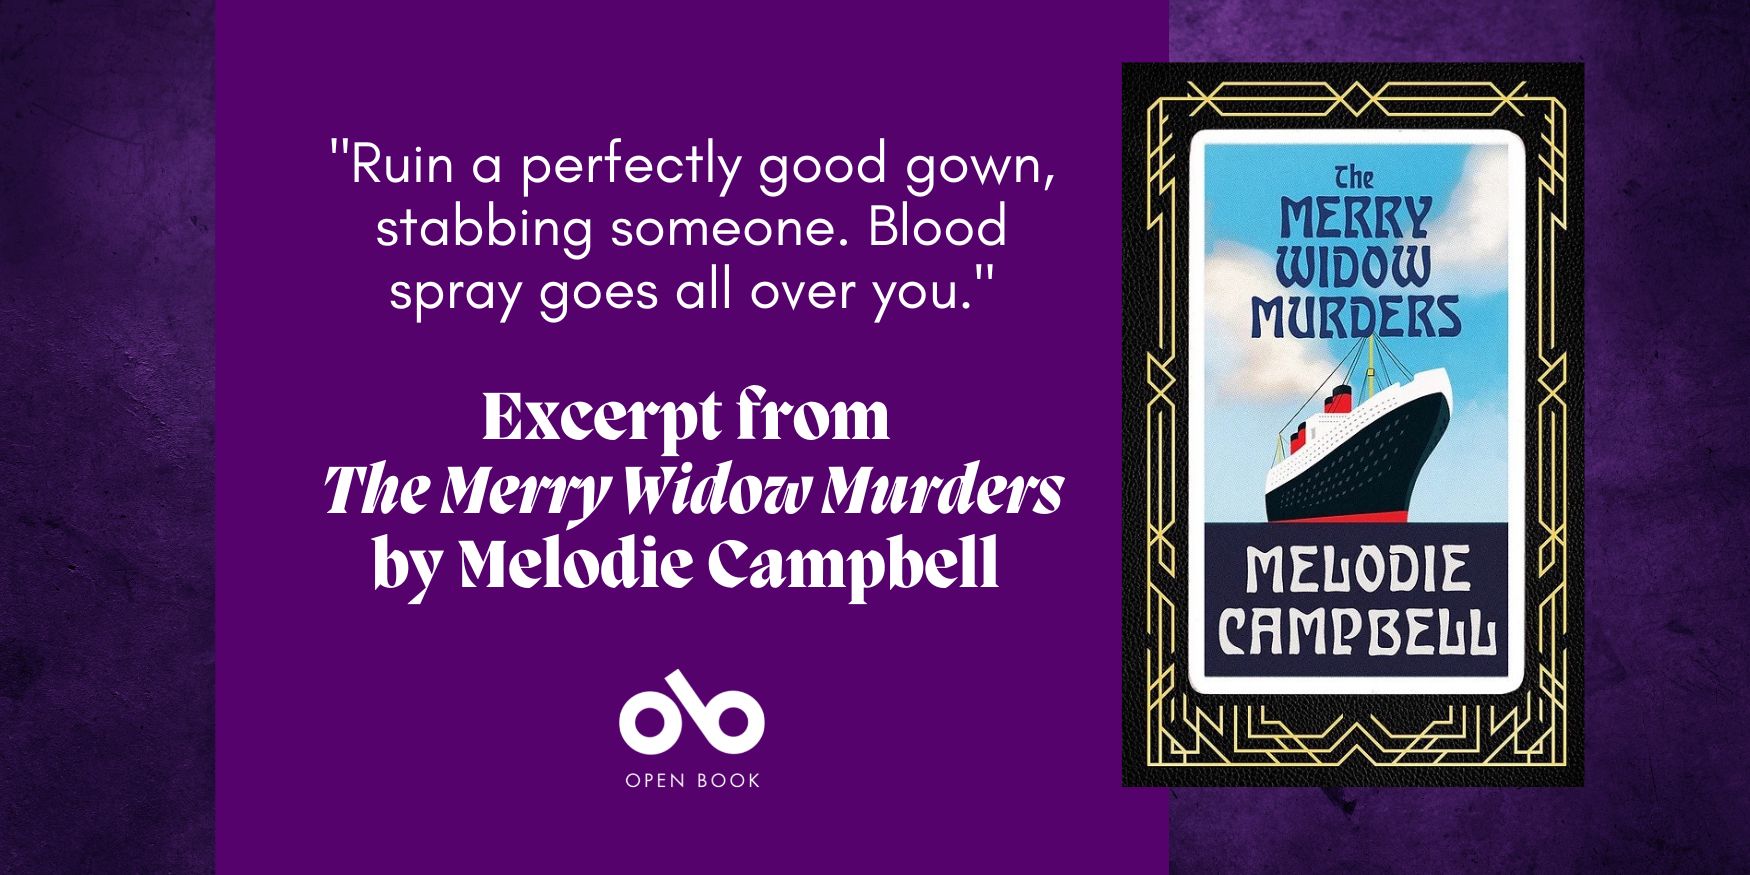 purple banner image with cover image of The Merry Widow Murders by Melodie Campbell and the text "